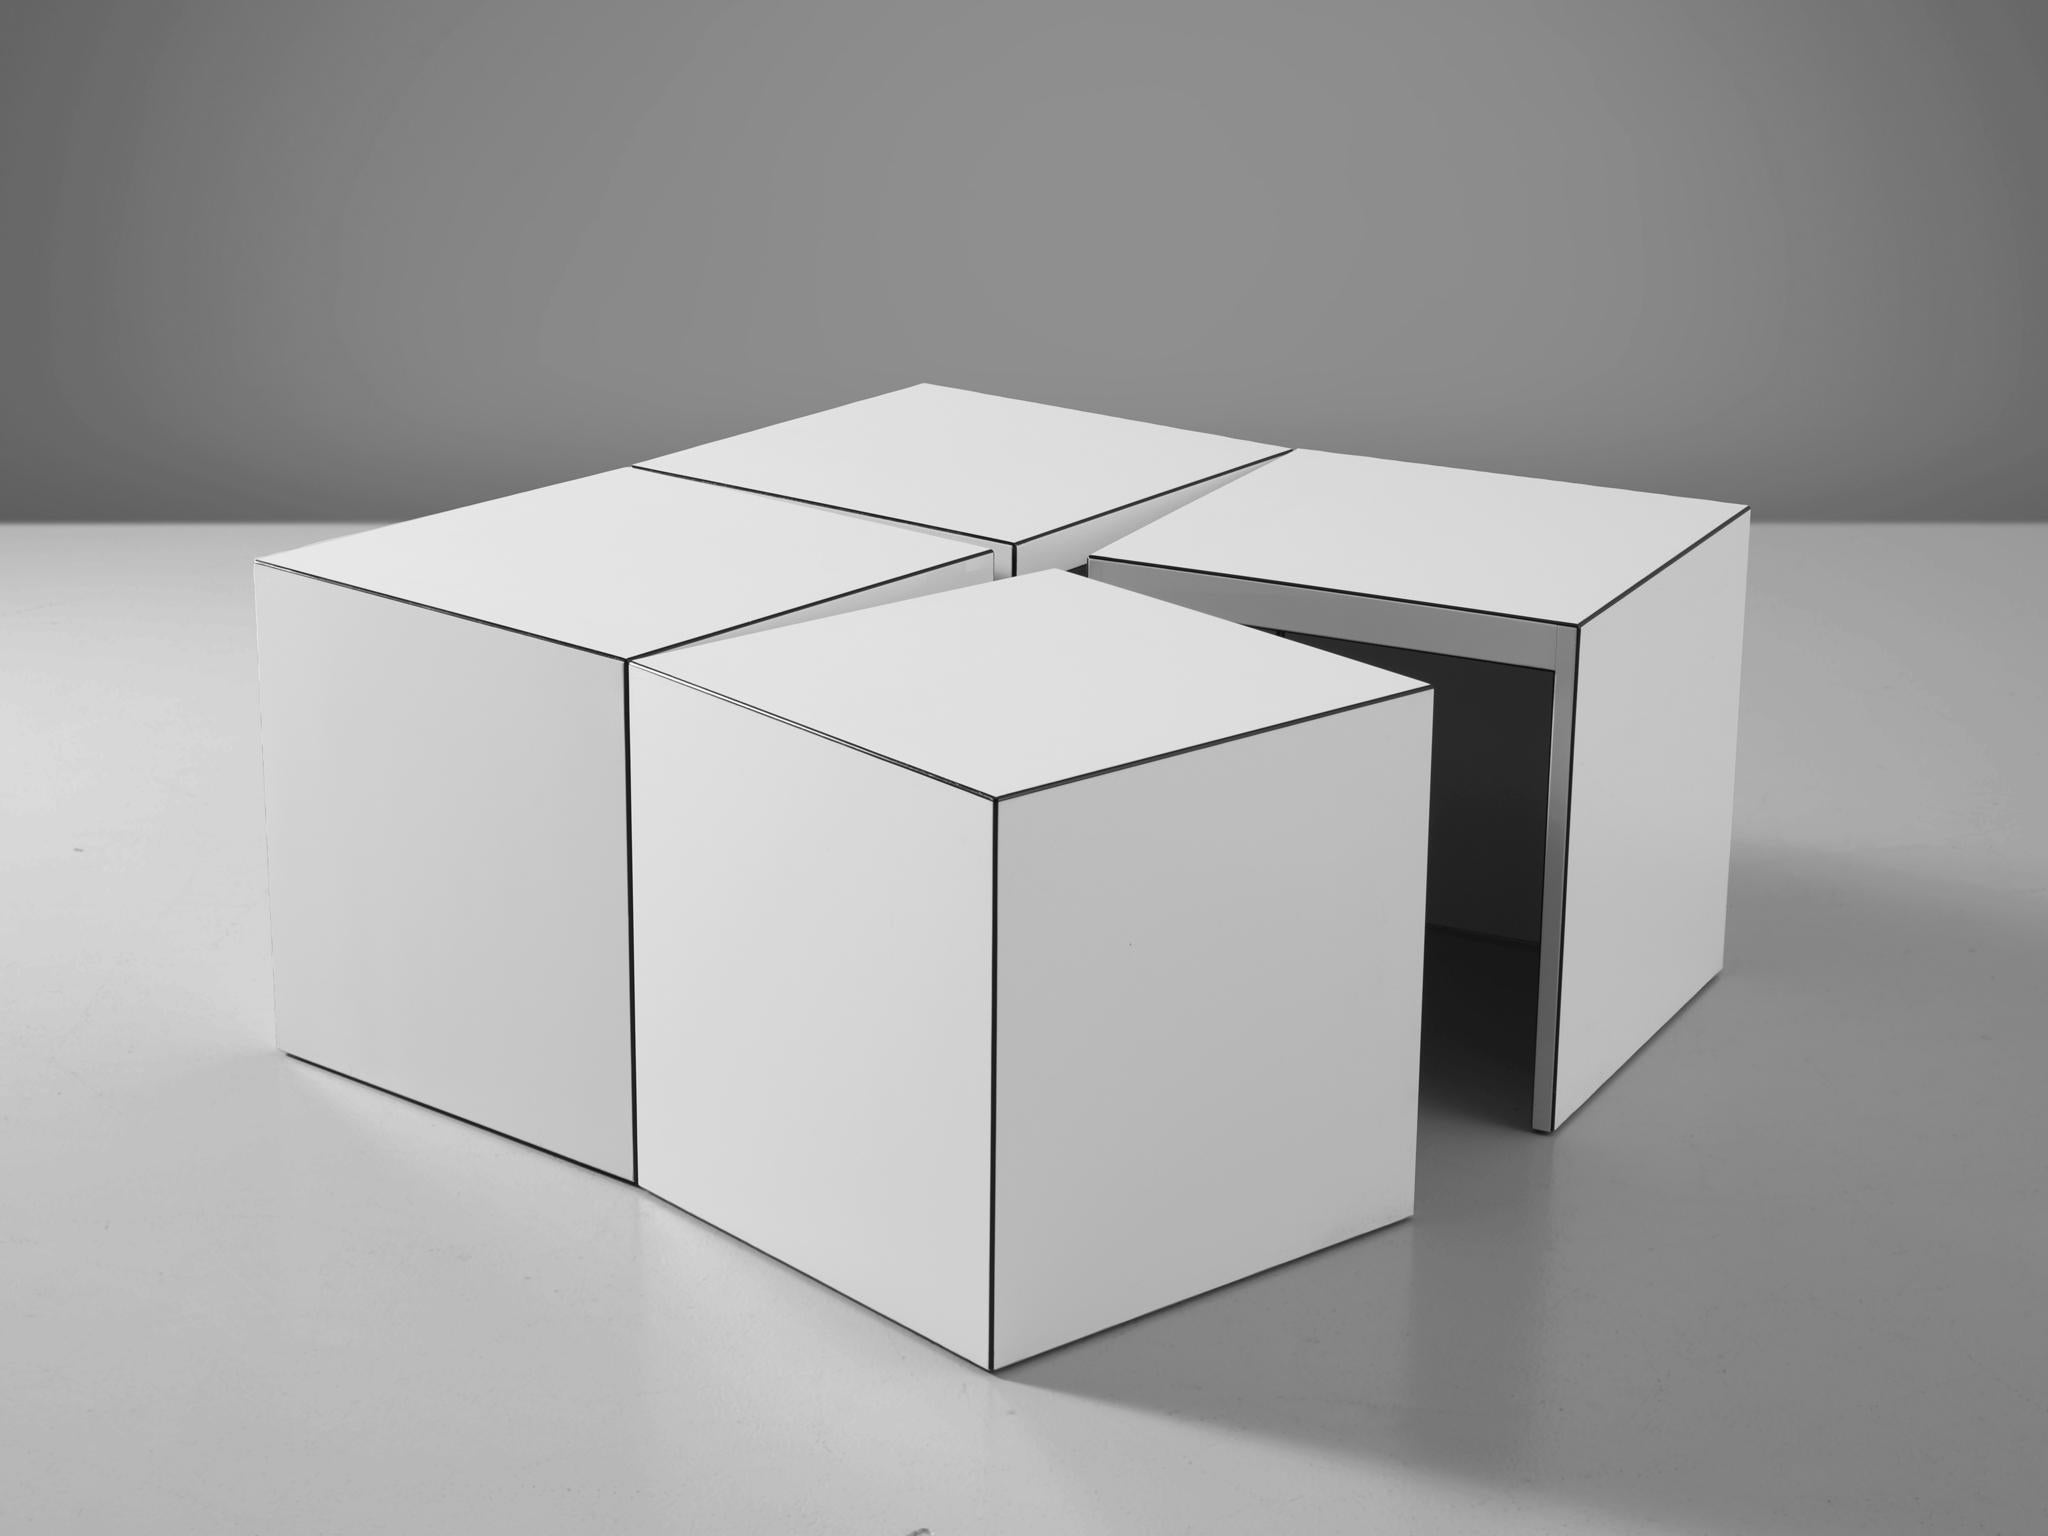 Jan Wichers and Alexander Blomberg for Rosenthal Munich, 'Domino' coffee table, white acrylic on building board, Germany, 1979

This playful coffee or side table can easily be transformed into several functional shapes. It consists of four